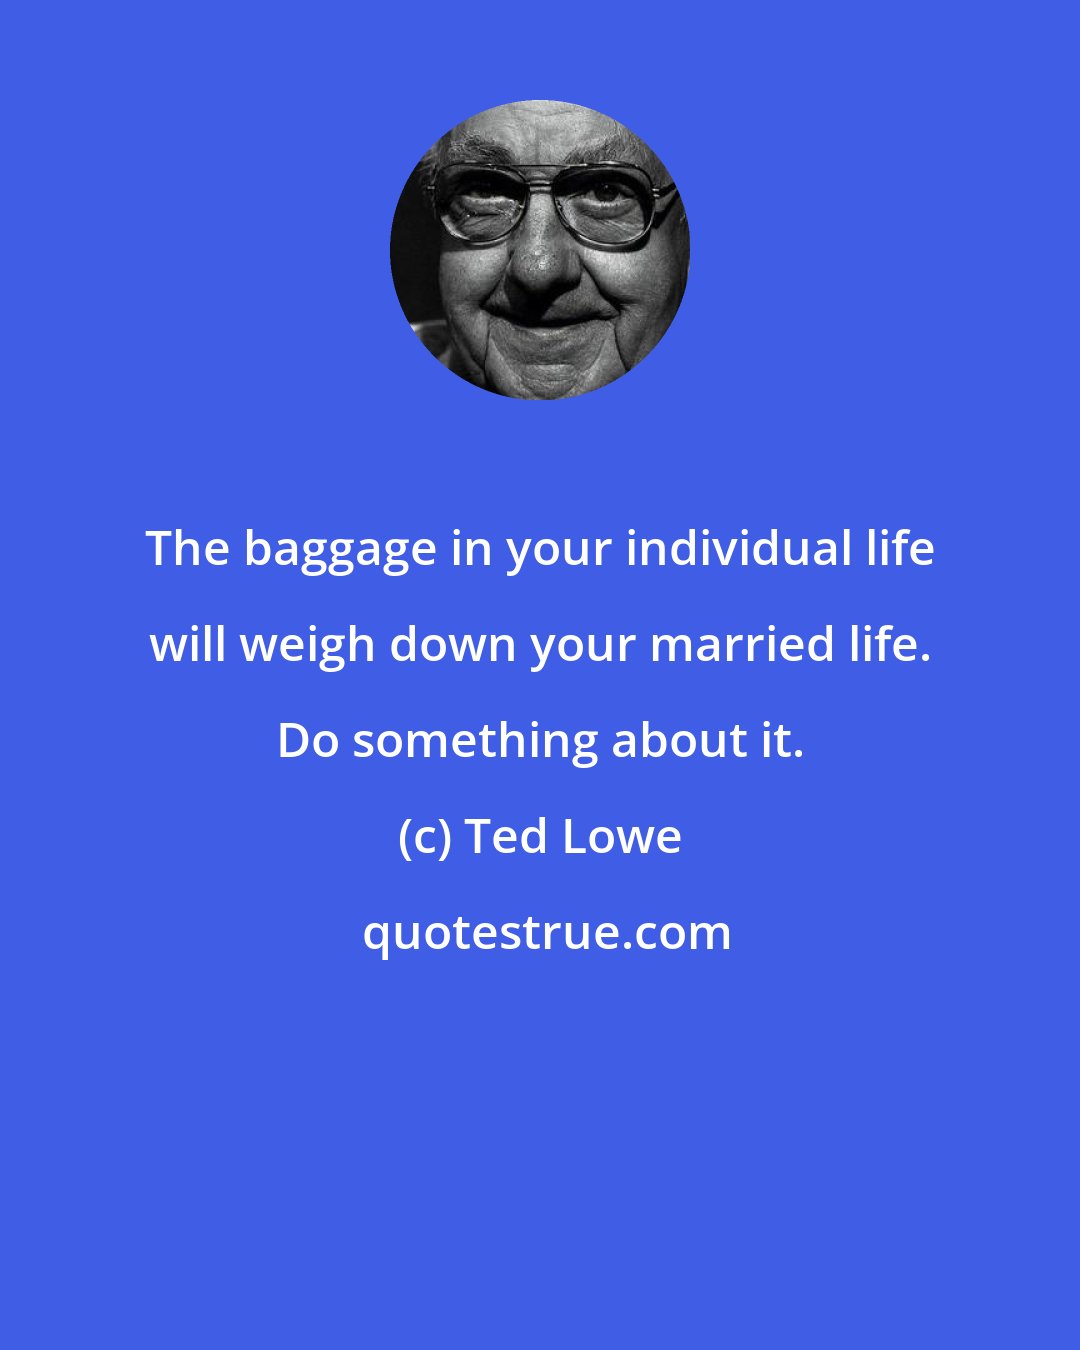 Ted Lowe: The baggage in your individual life will weigh down your married life. Do something about it.